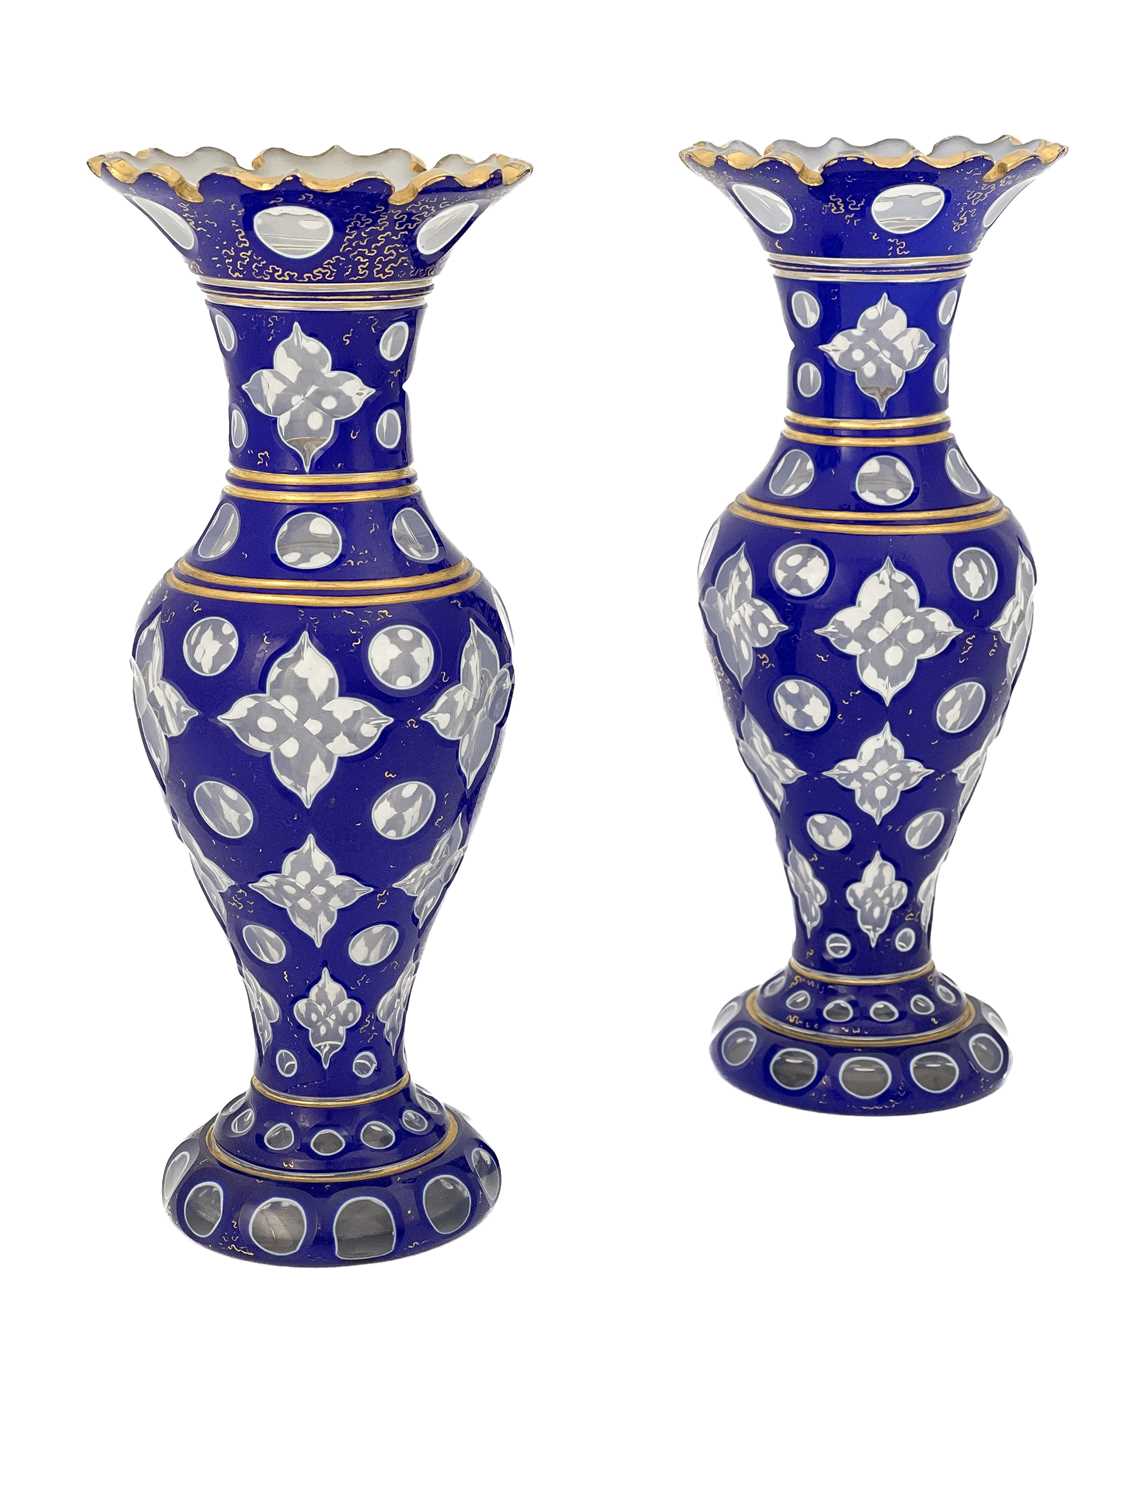 A pair of Bohemian cased and cut glass vases, 19th century, inverse baluster form, decorated with